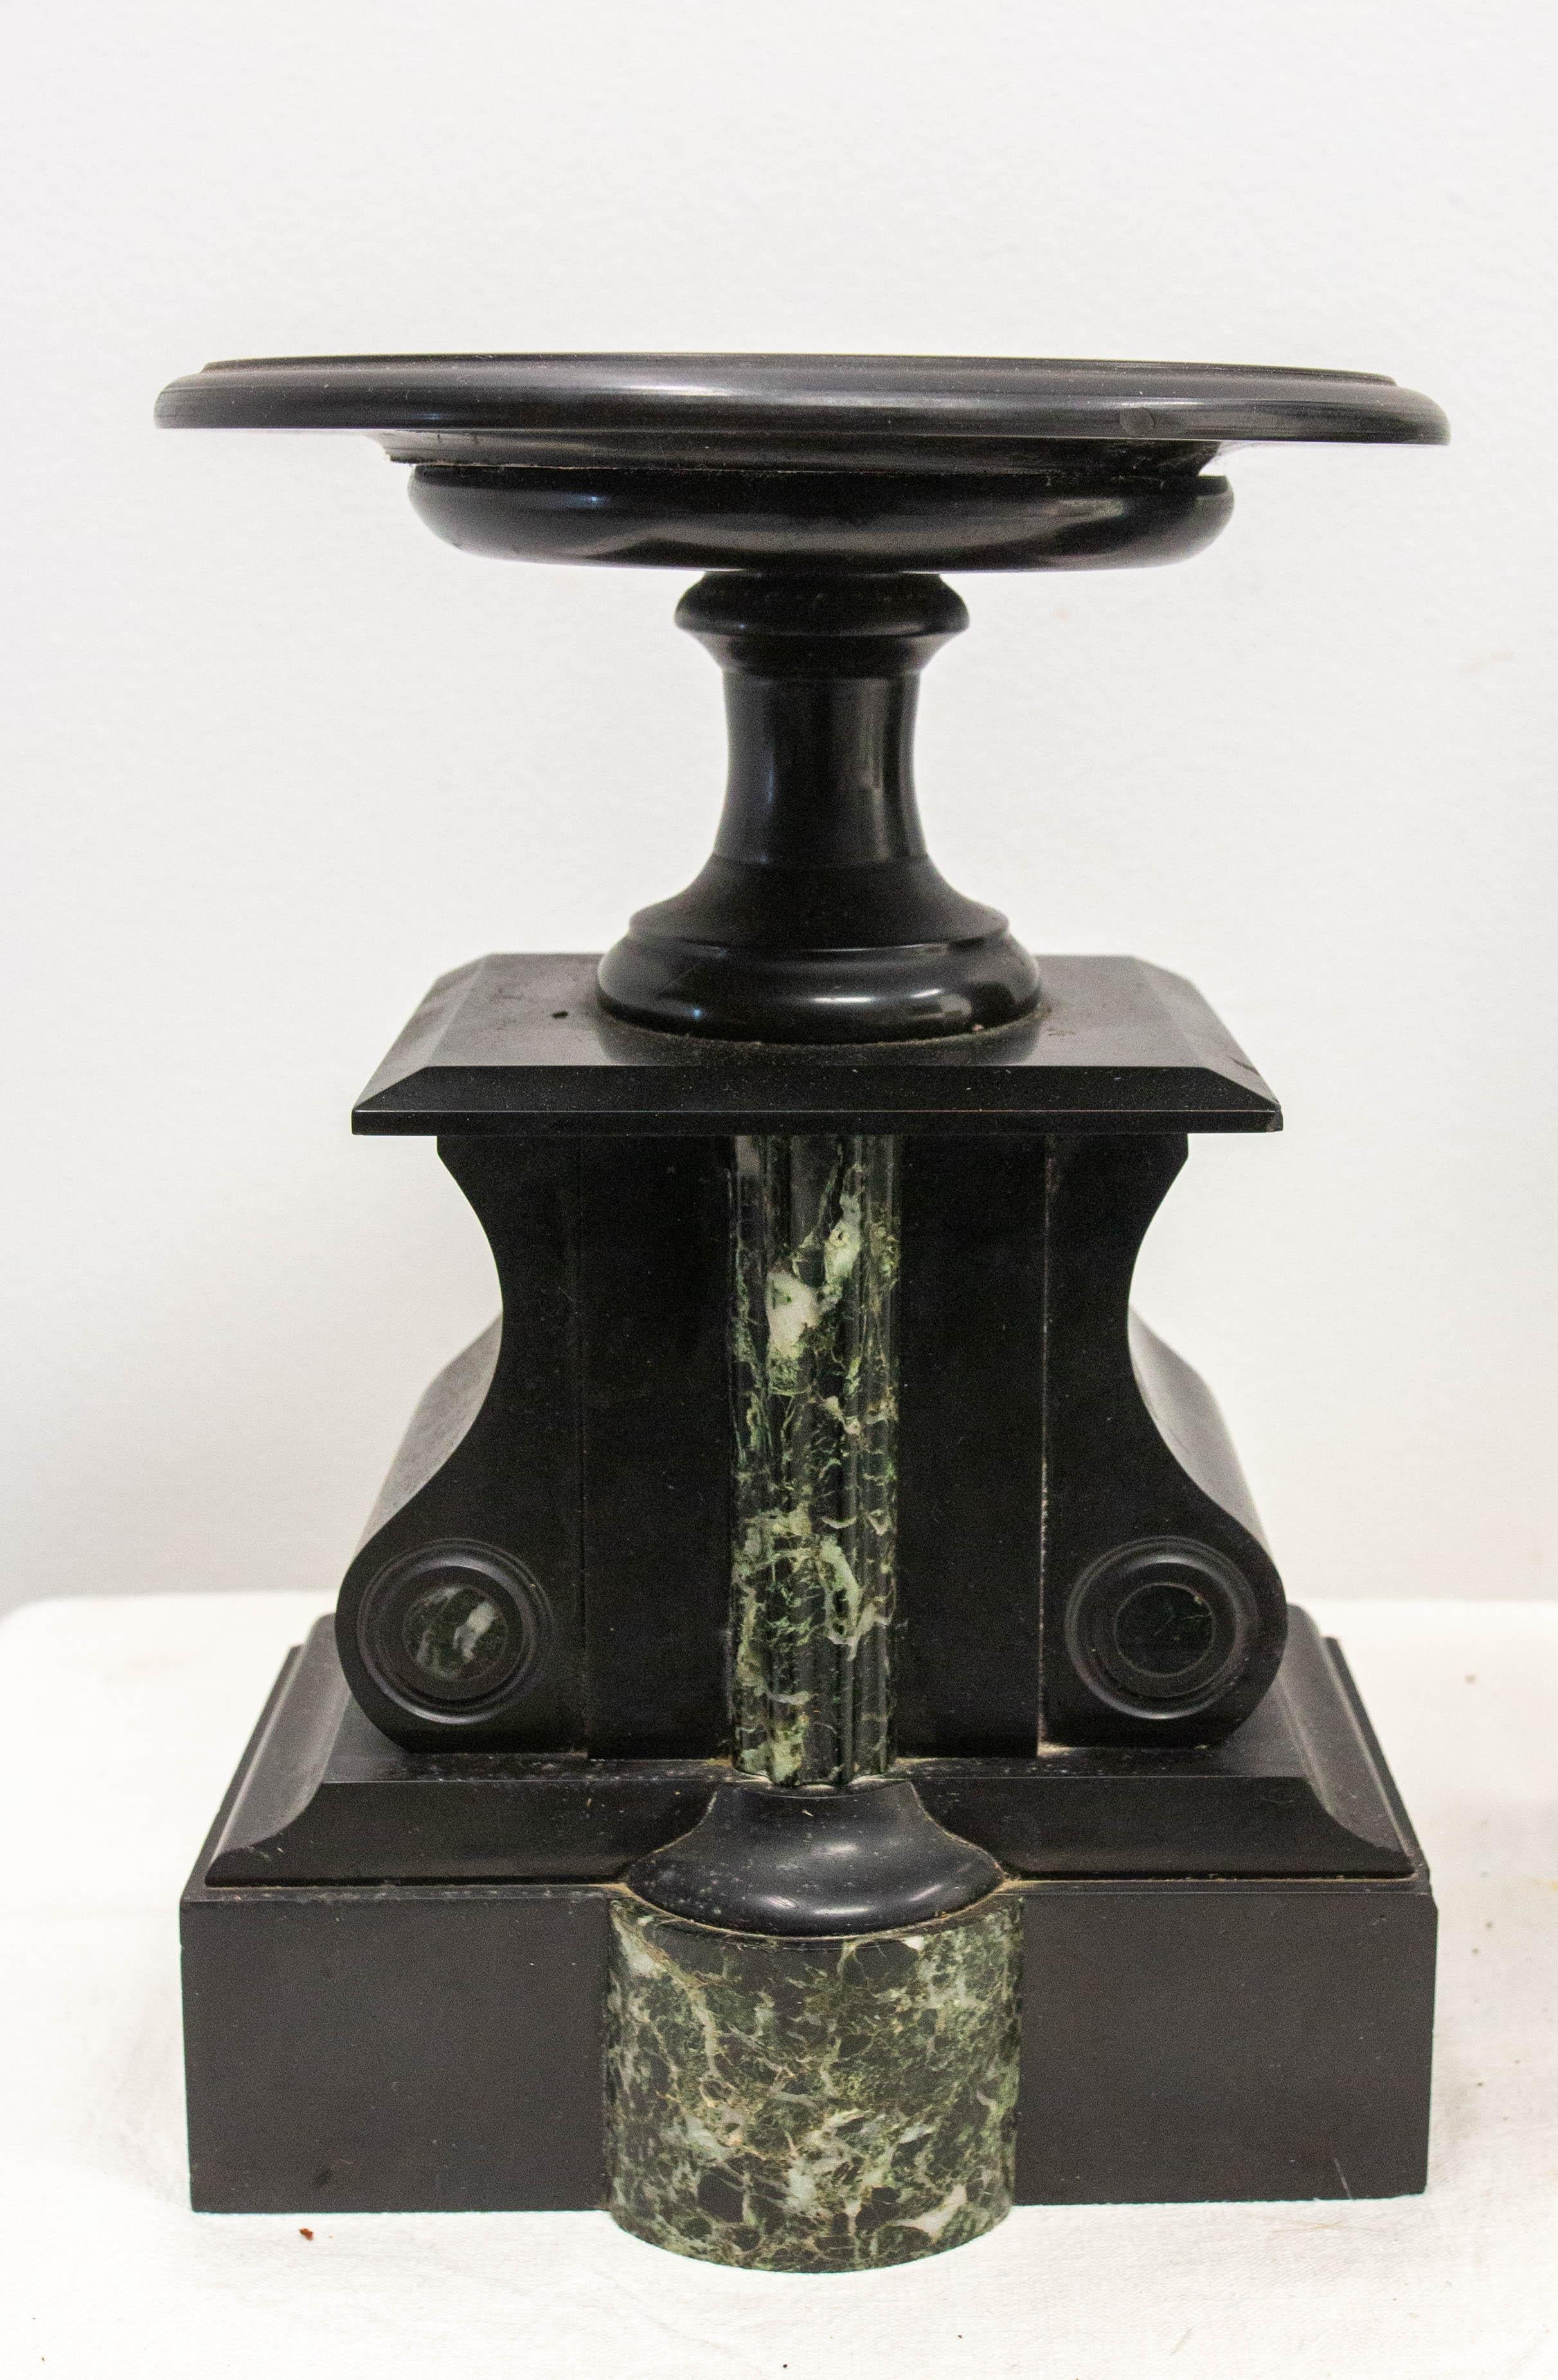 Napoleon III French two marbles mantel clock late 19th century circa 1890.
Set of a clock and two pedestals.
Mercury pendulum 

The French movement of the clock will be checked before shipping
In good condition with signs of wear.

Measures of the